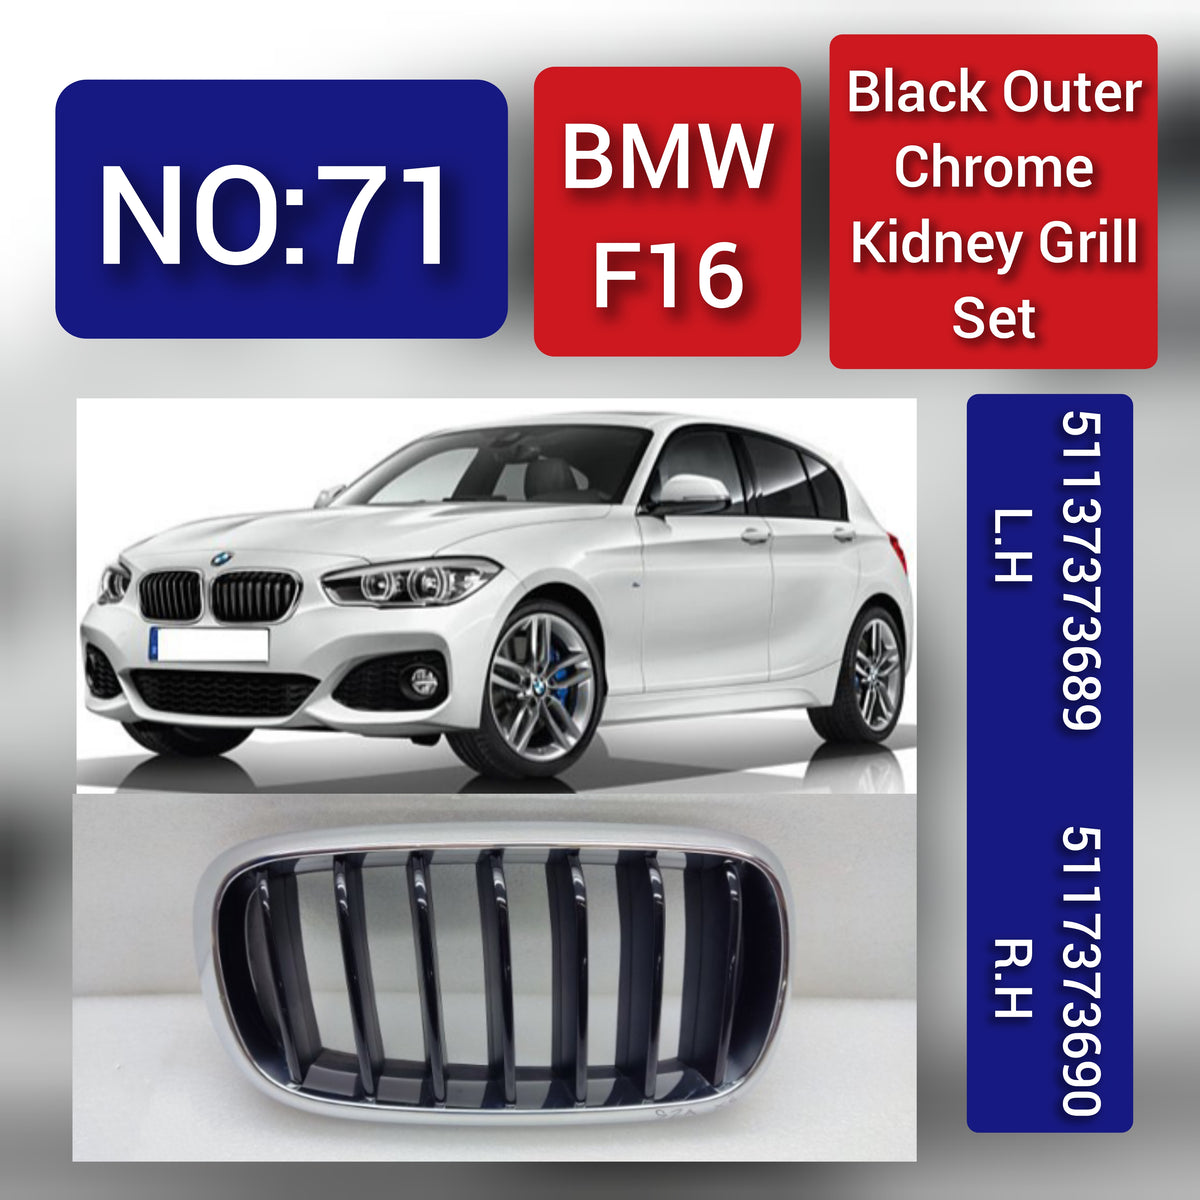 BMW F16 Black Outer Chrome Kidney Grill Set 51137373689 L.H, 5117373690 R.H Tag 71